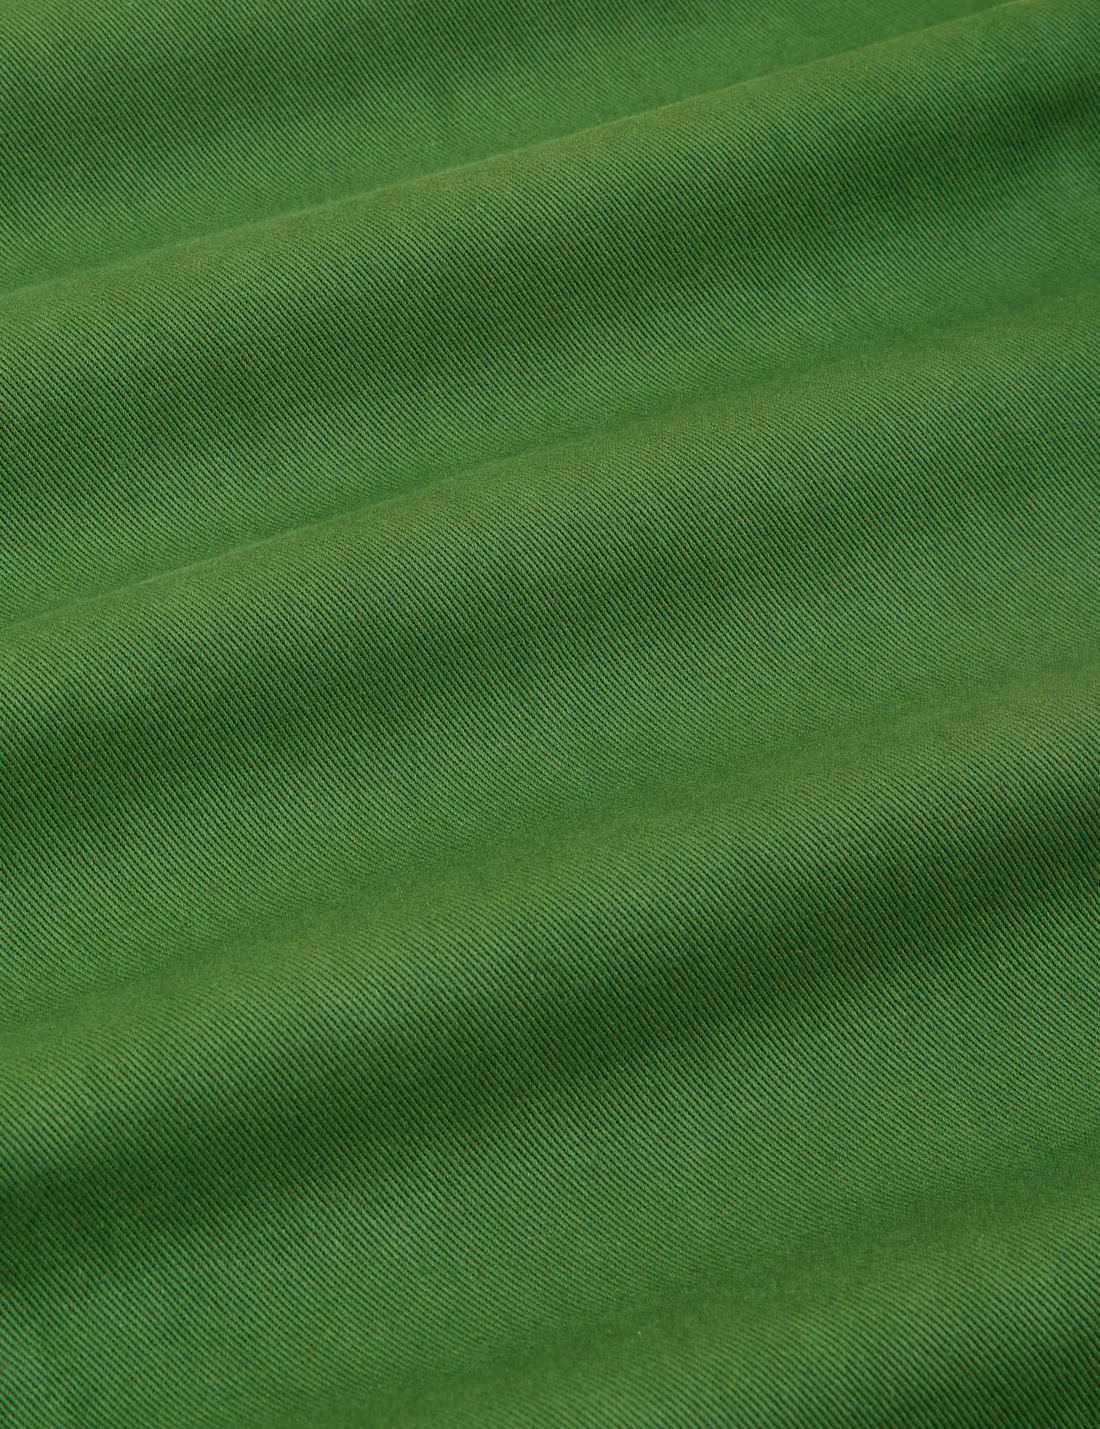 Heavyweight Trousers in Lawn Green fabric detail close up